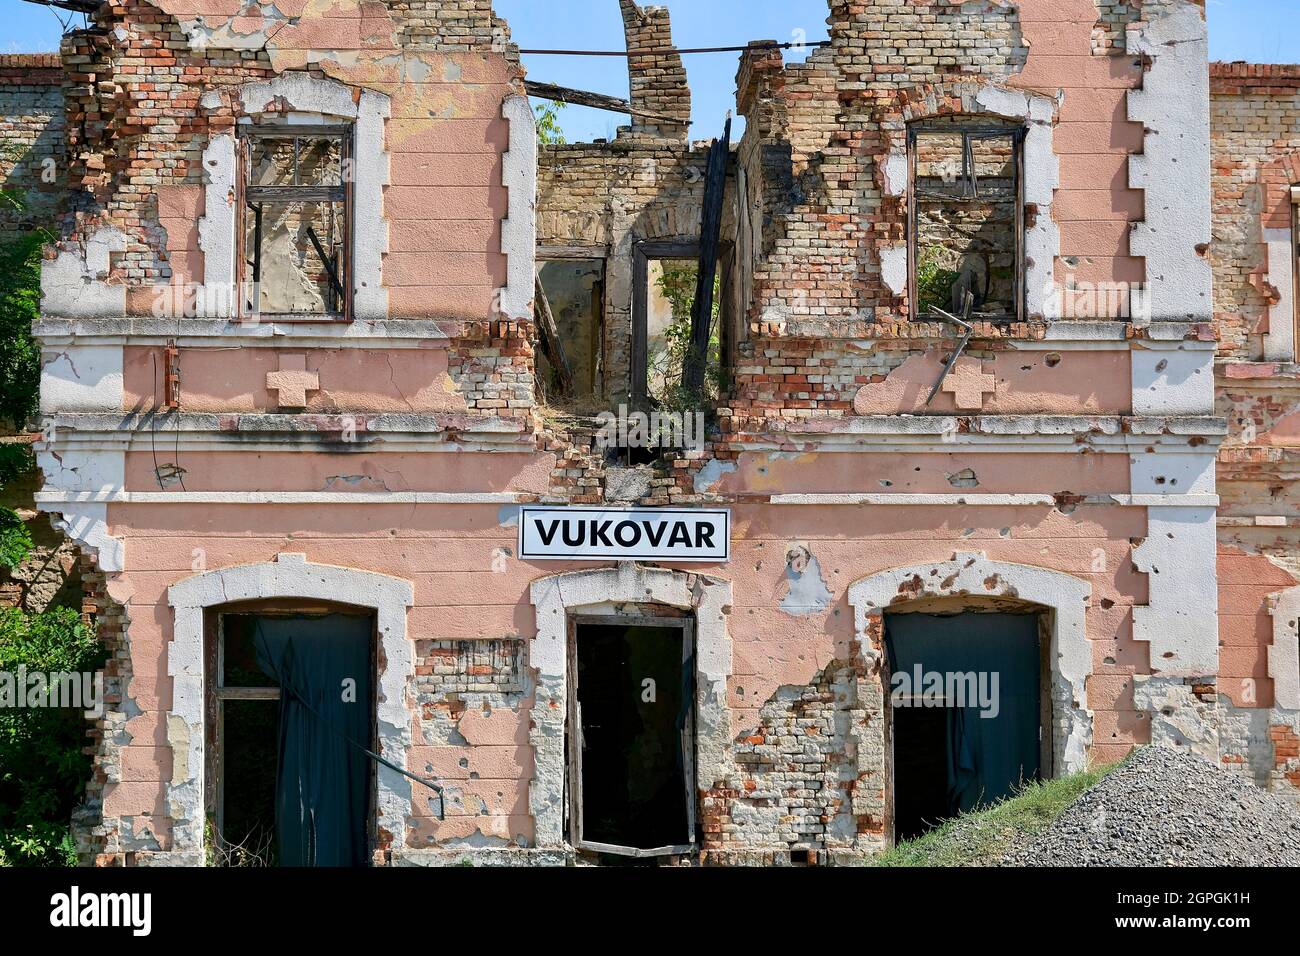 Croatia, Slavonia, Vukovar, facade of the ruined station after the siege of Vukovar between August and November 1991 Stock Photo